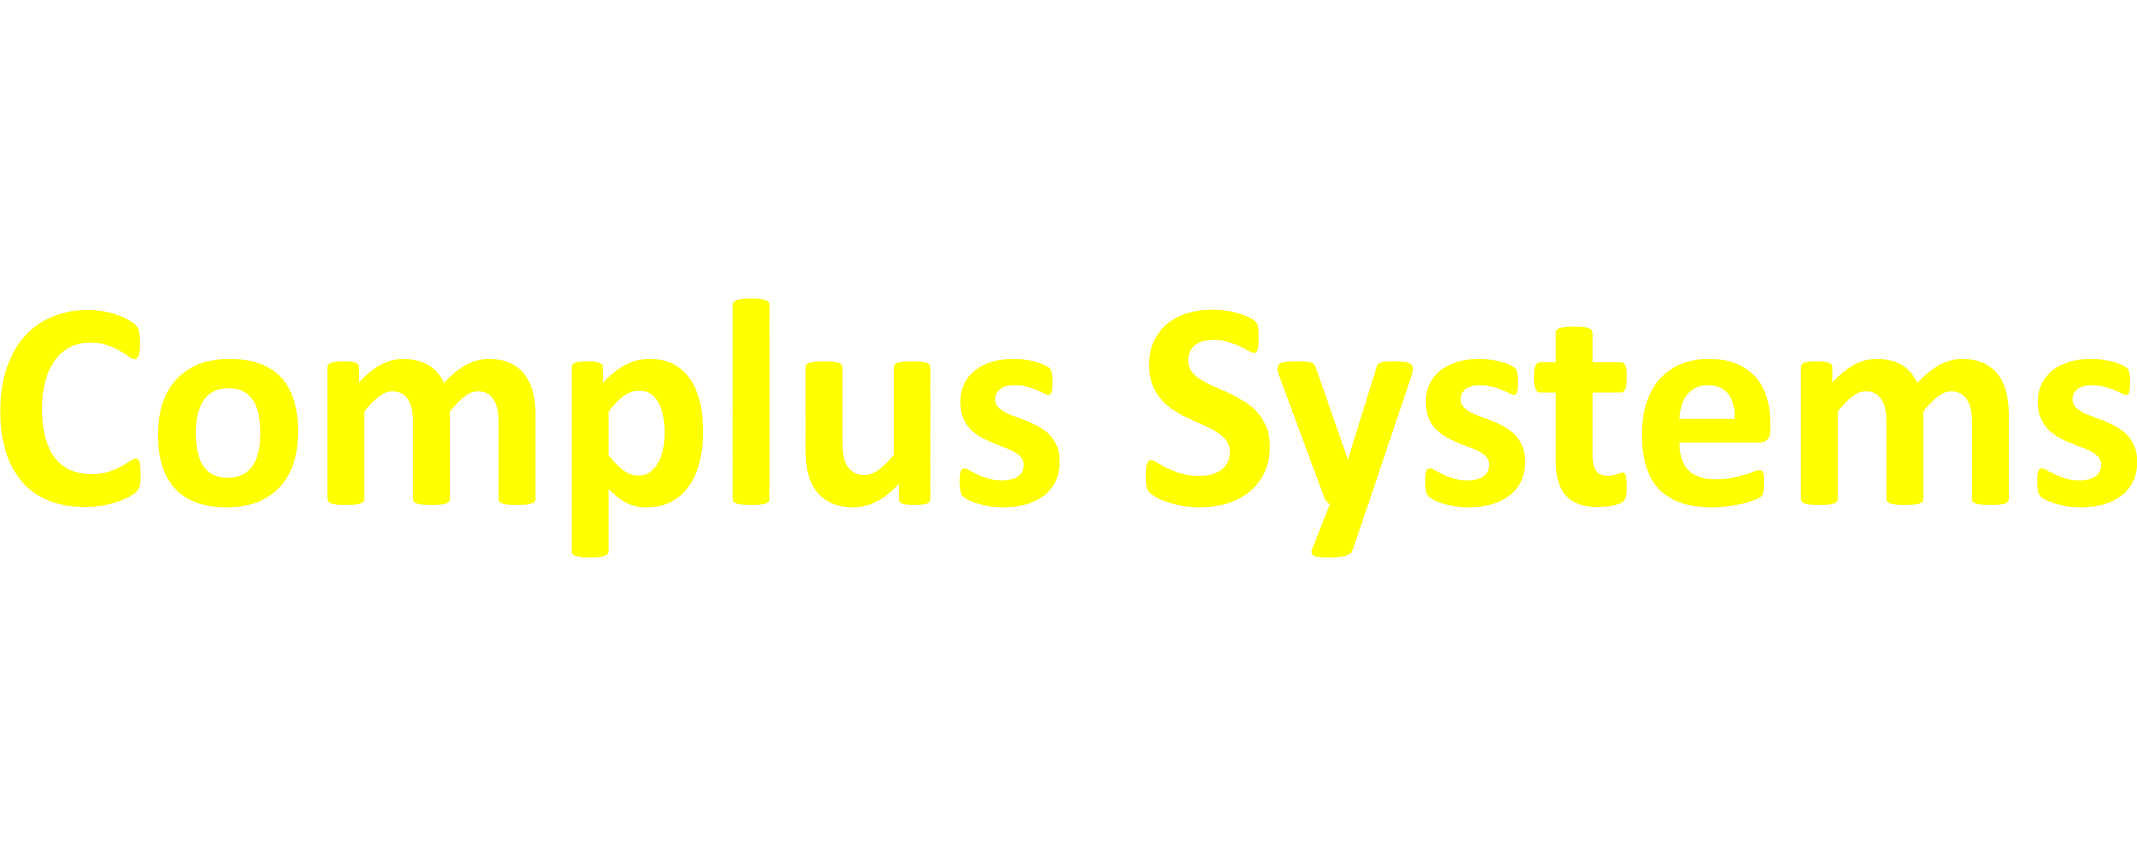 Gruppo Complus Systems